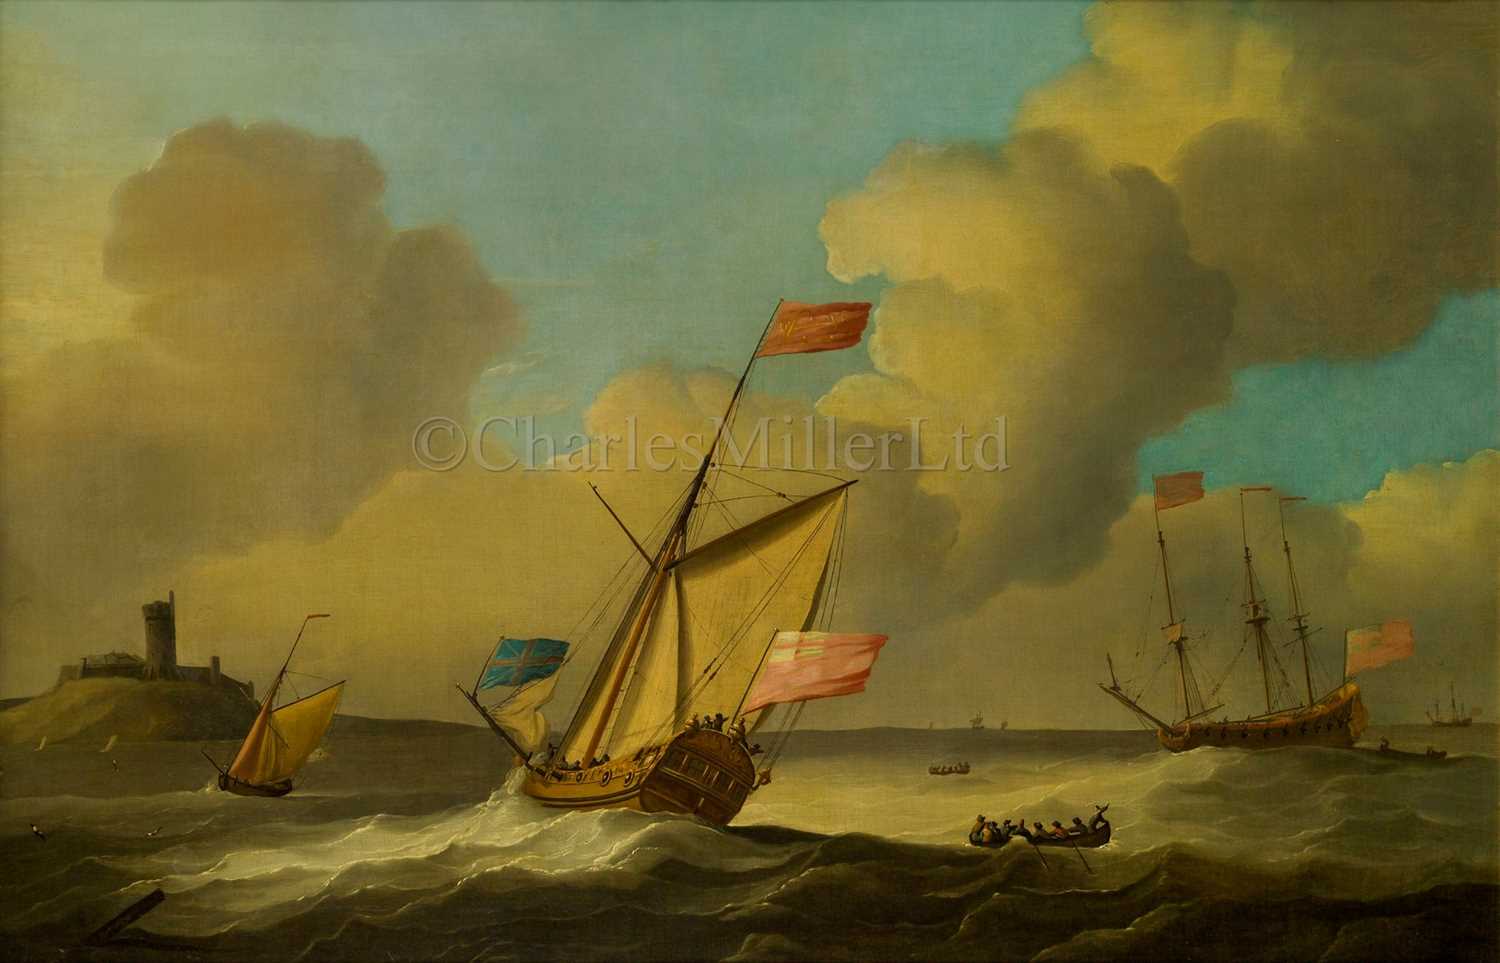 Lot 38 - PETER MONAMY (BRITISH, 1681-1749) - Two Admiralty yachts
off a coastal fortress, the 3-master riding at anchor and the cutter heading
ashore in the stiff breeze